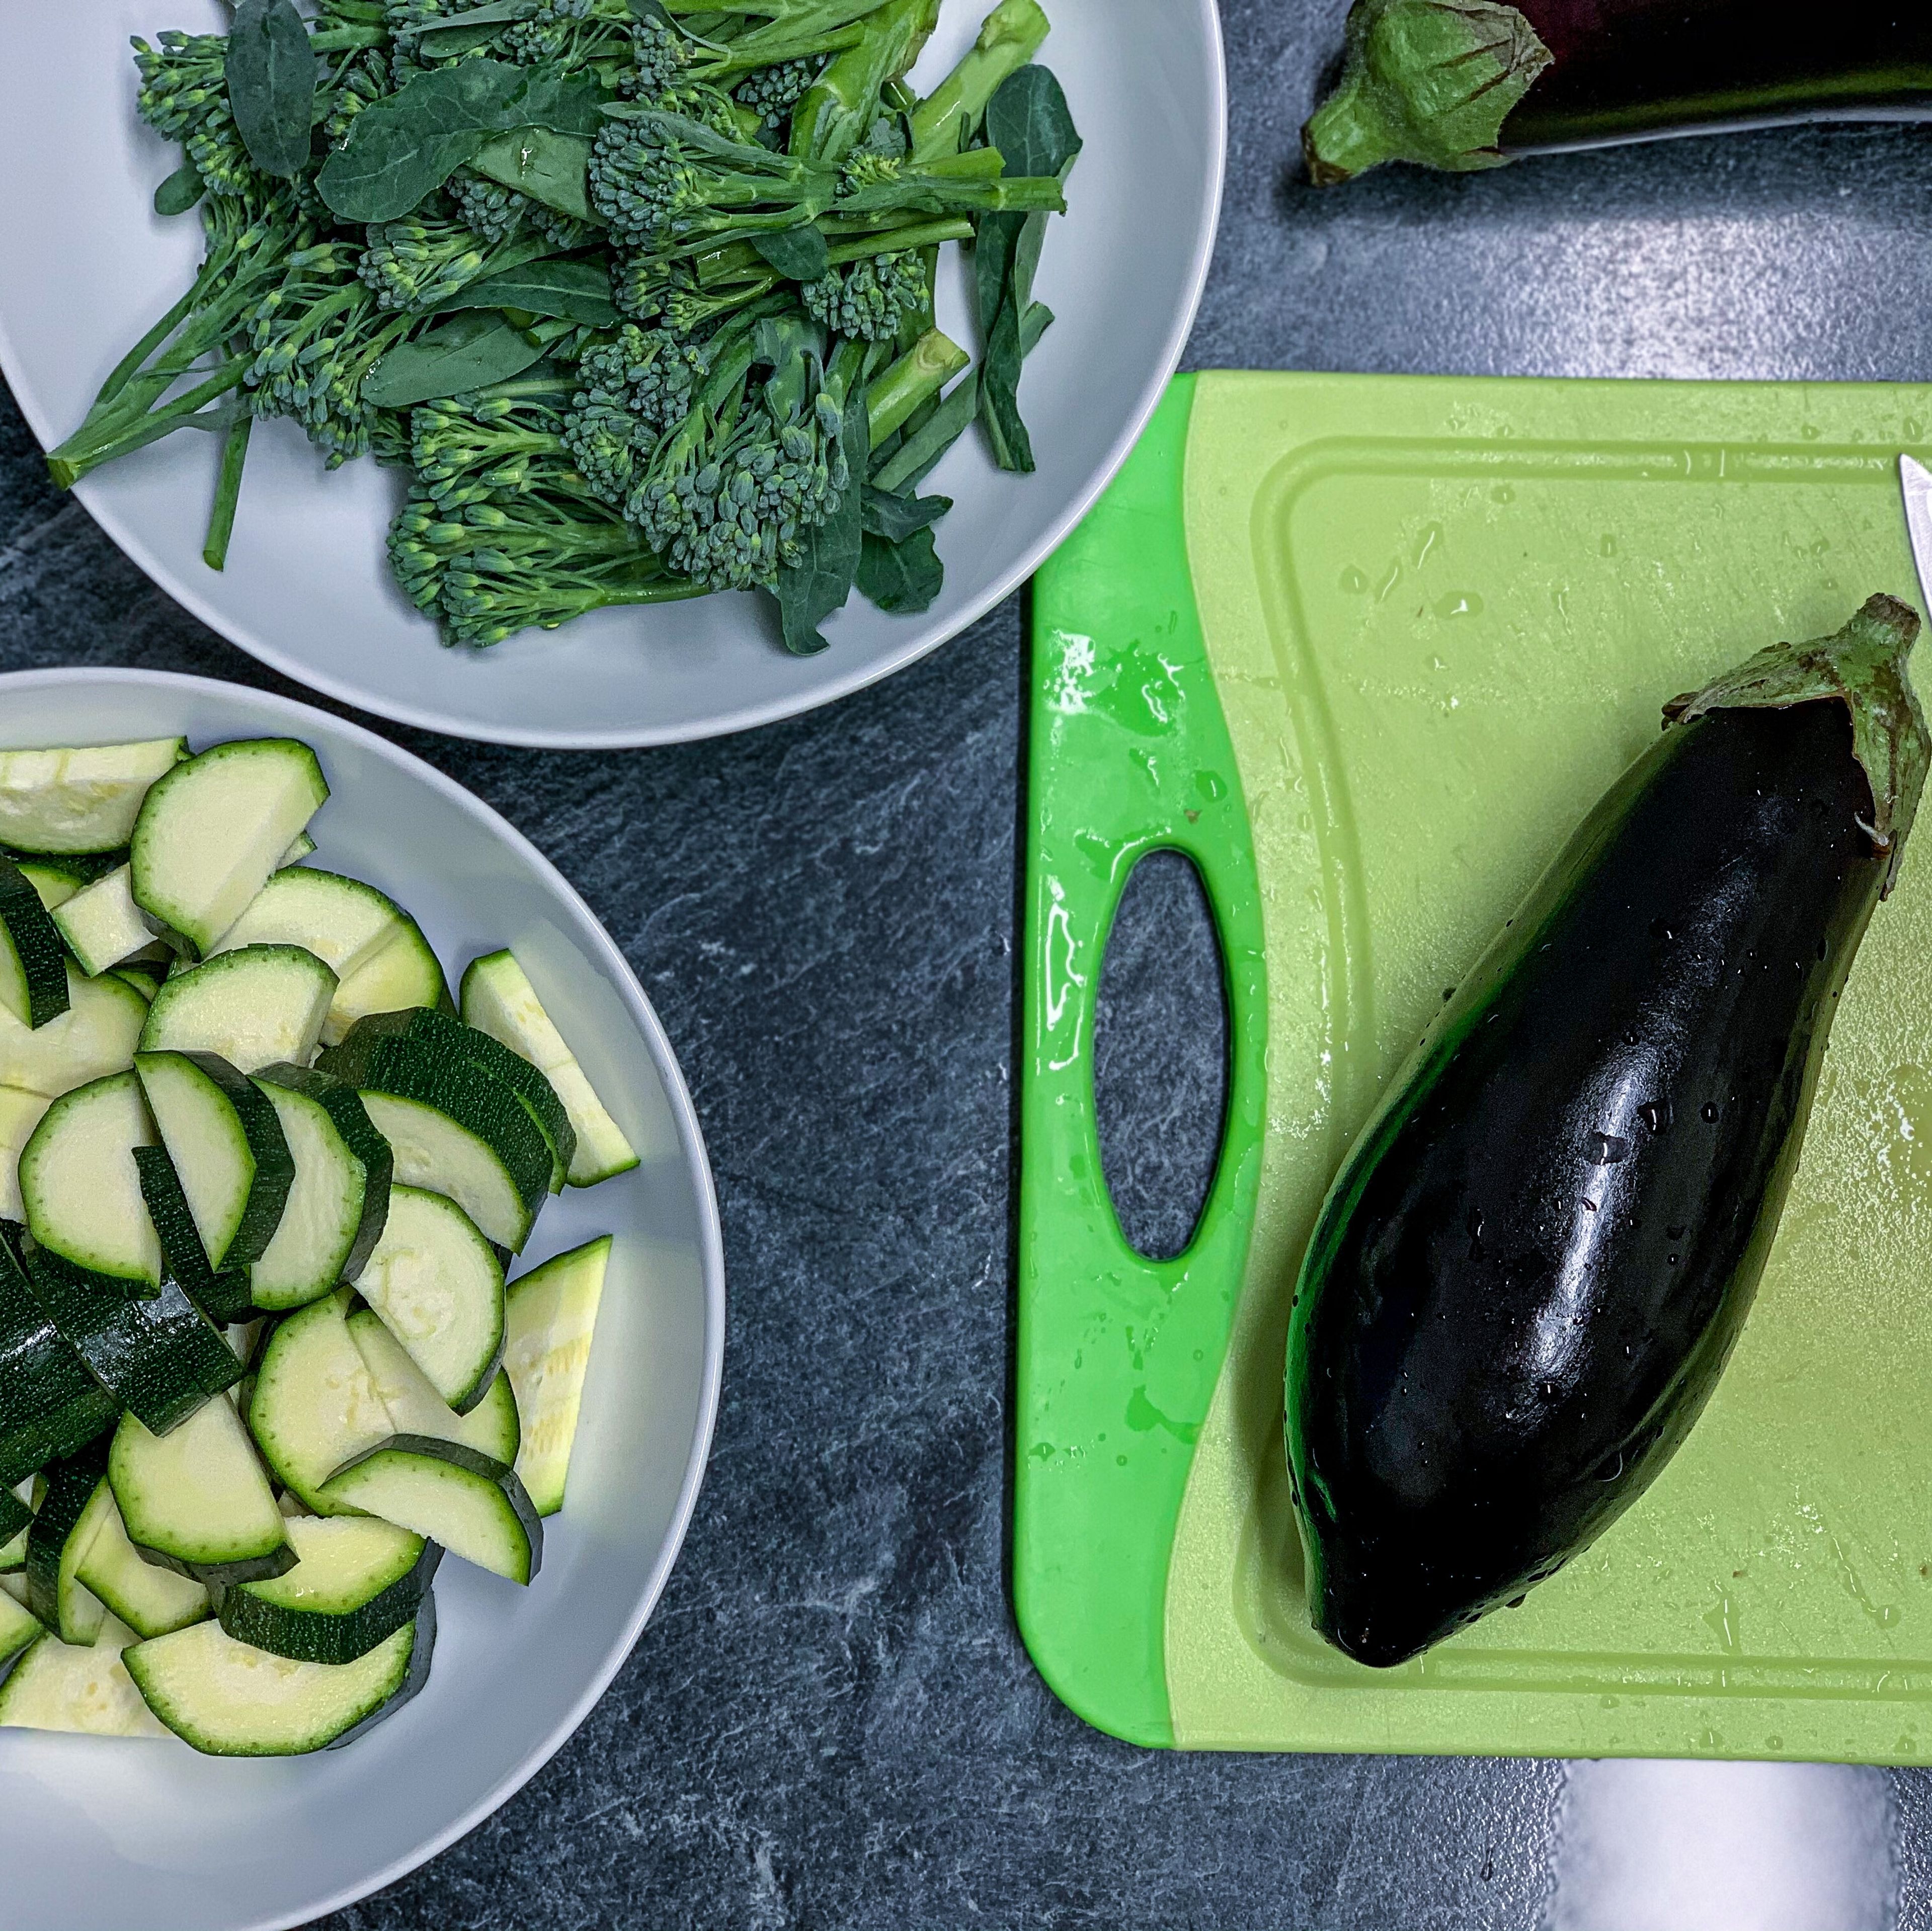 Start by washing and chopping up all of the veg. 